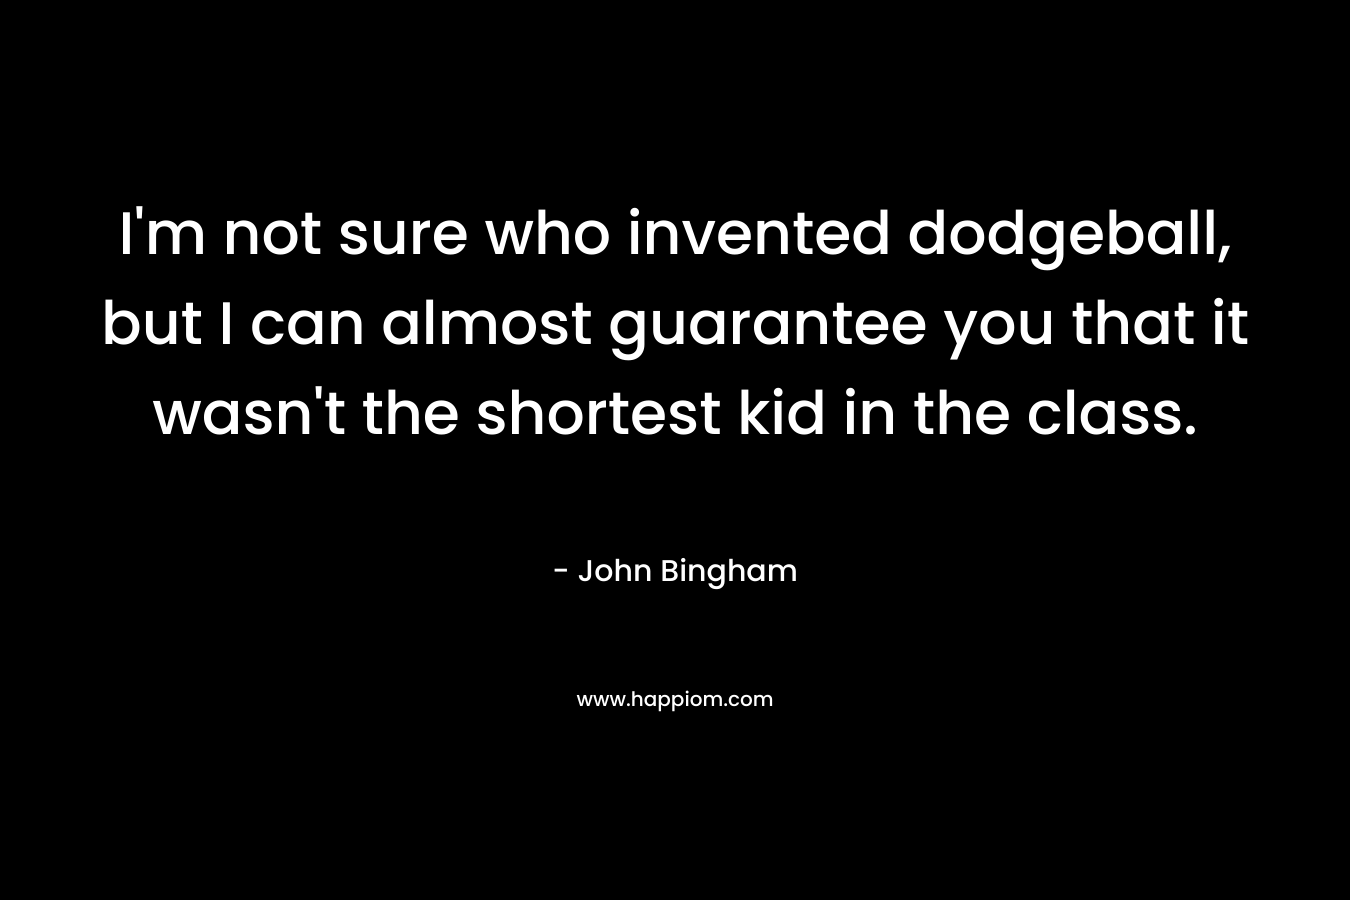 I’m not sure who invented dodgeball, but I can almost guarantee you that it wasn’t the shortest kid in the class. – John Bingham